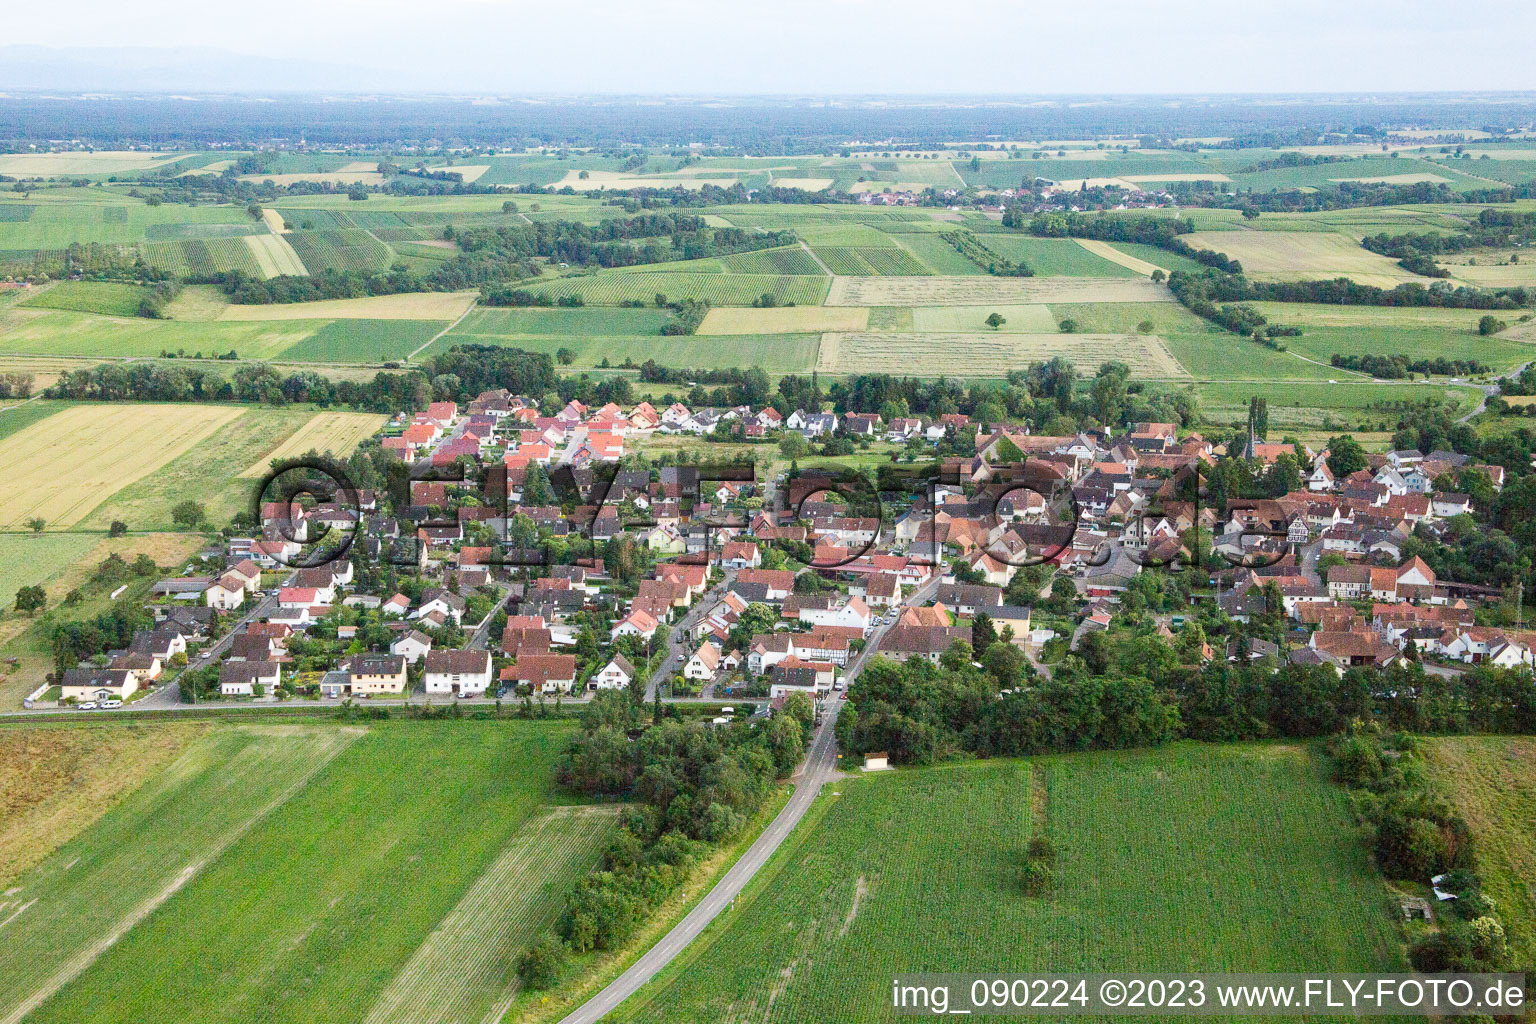 Drone recording of Barbelroth in the state Rhineland-Palatinate, Germany